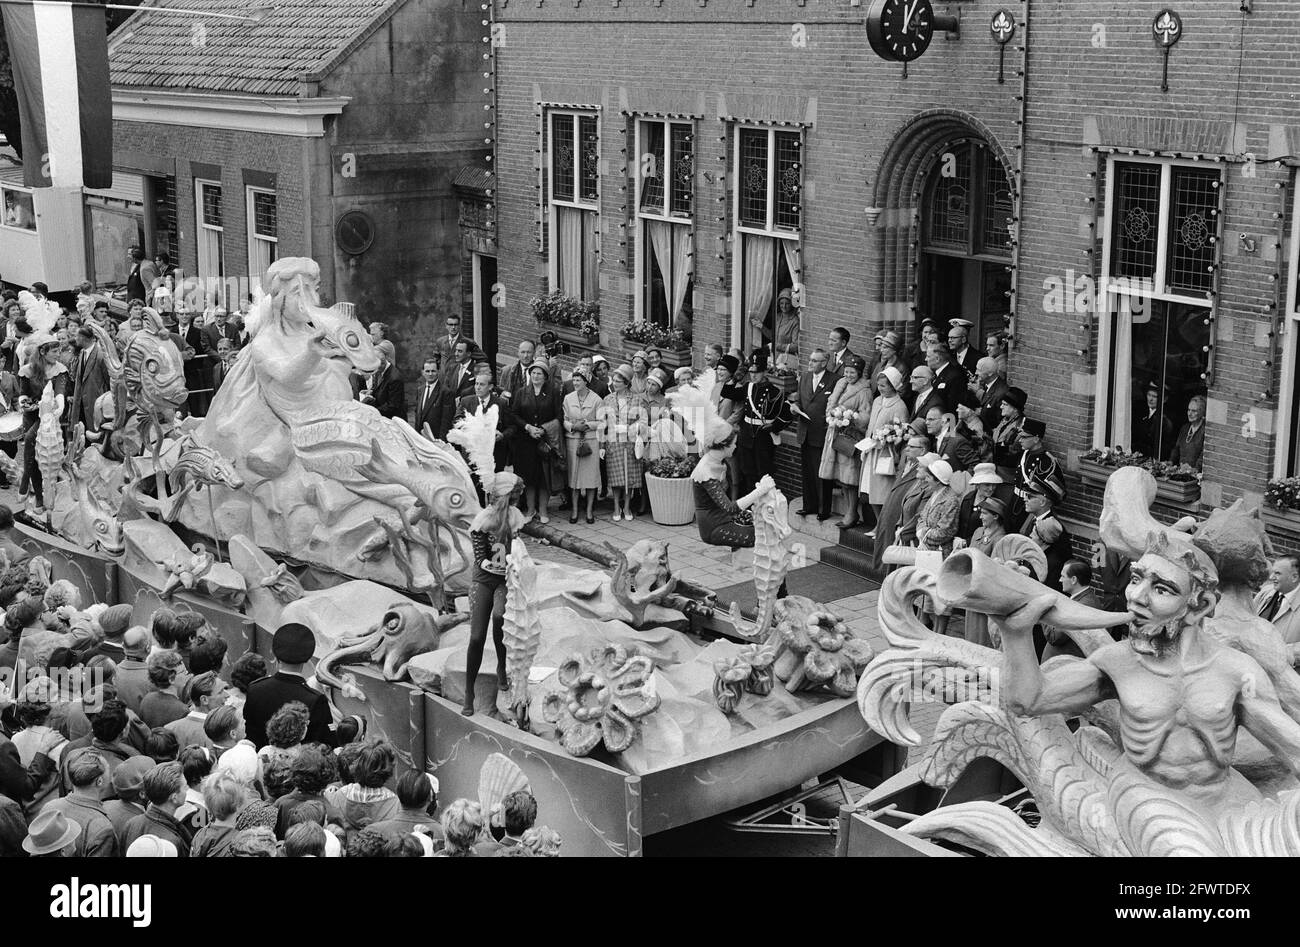 Oyster Festival in Irishke. Corso in Irishke, 8 September 1961, celebrations, The Netherlands, 20th century press agency photo, news to remember, documentary, historic photography 1945-1990, visual stories, human history of the Twentieth Century, capturing moments in time Stock Photo